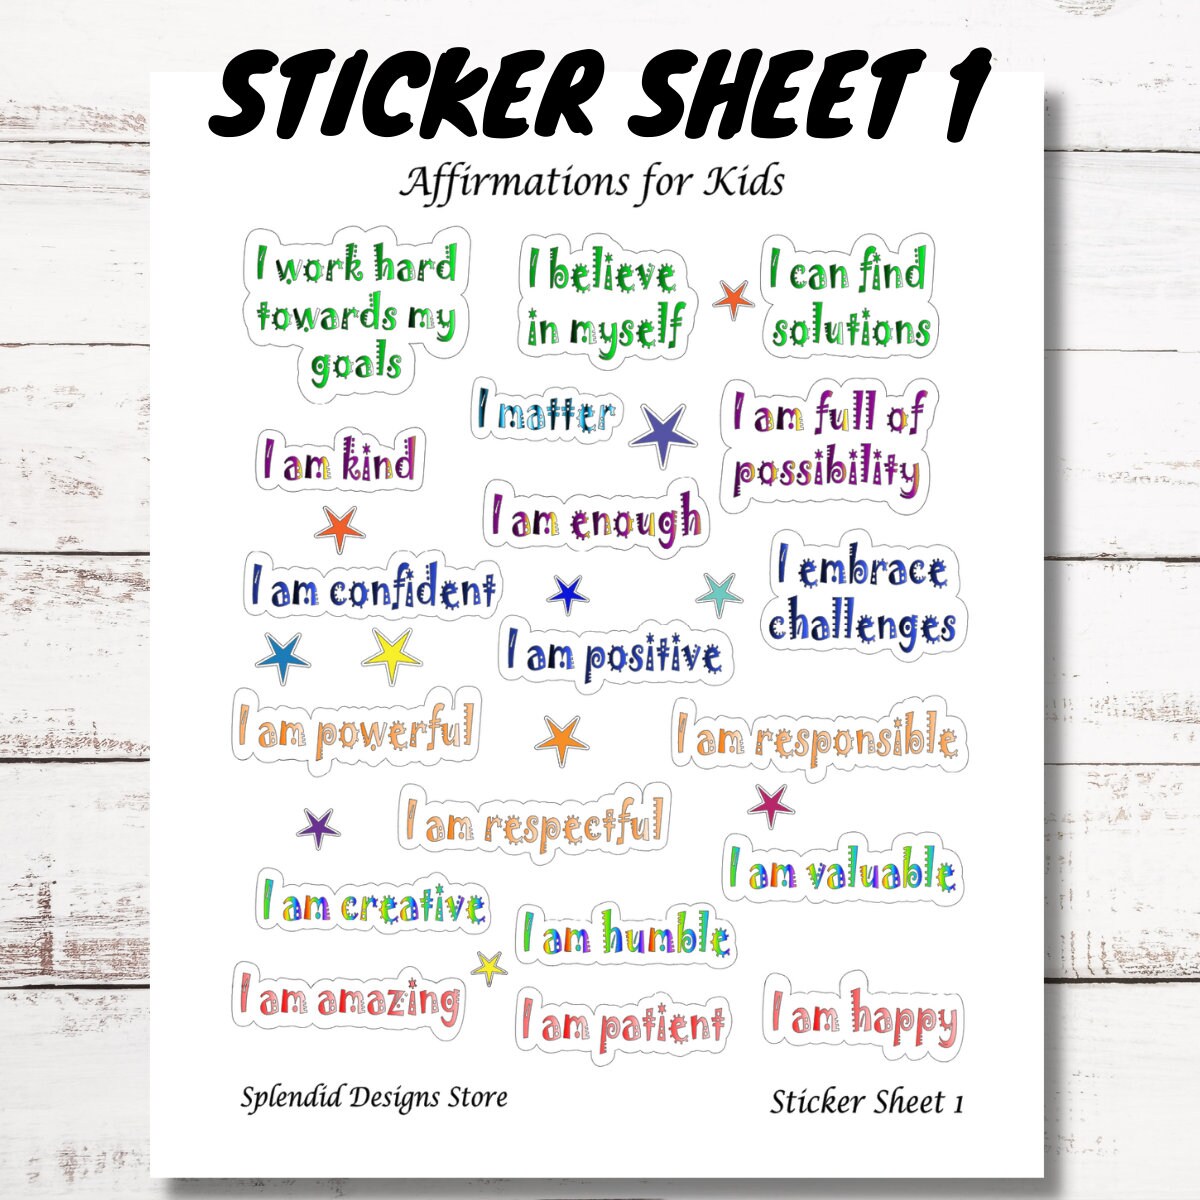 Affirmations for Kids, Mini Stickers, Afirmation Stickers for Kids, Self-Confidence Stickers for Kids, Motivational Stickers for Kids